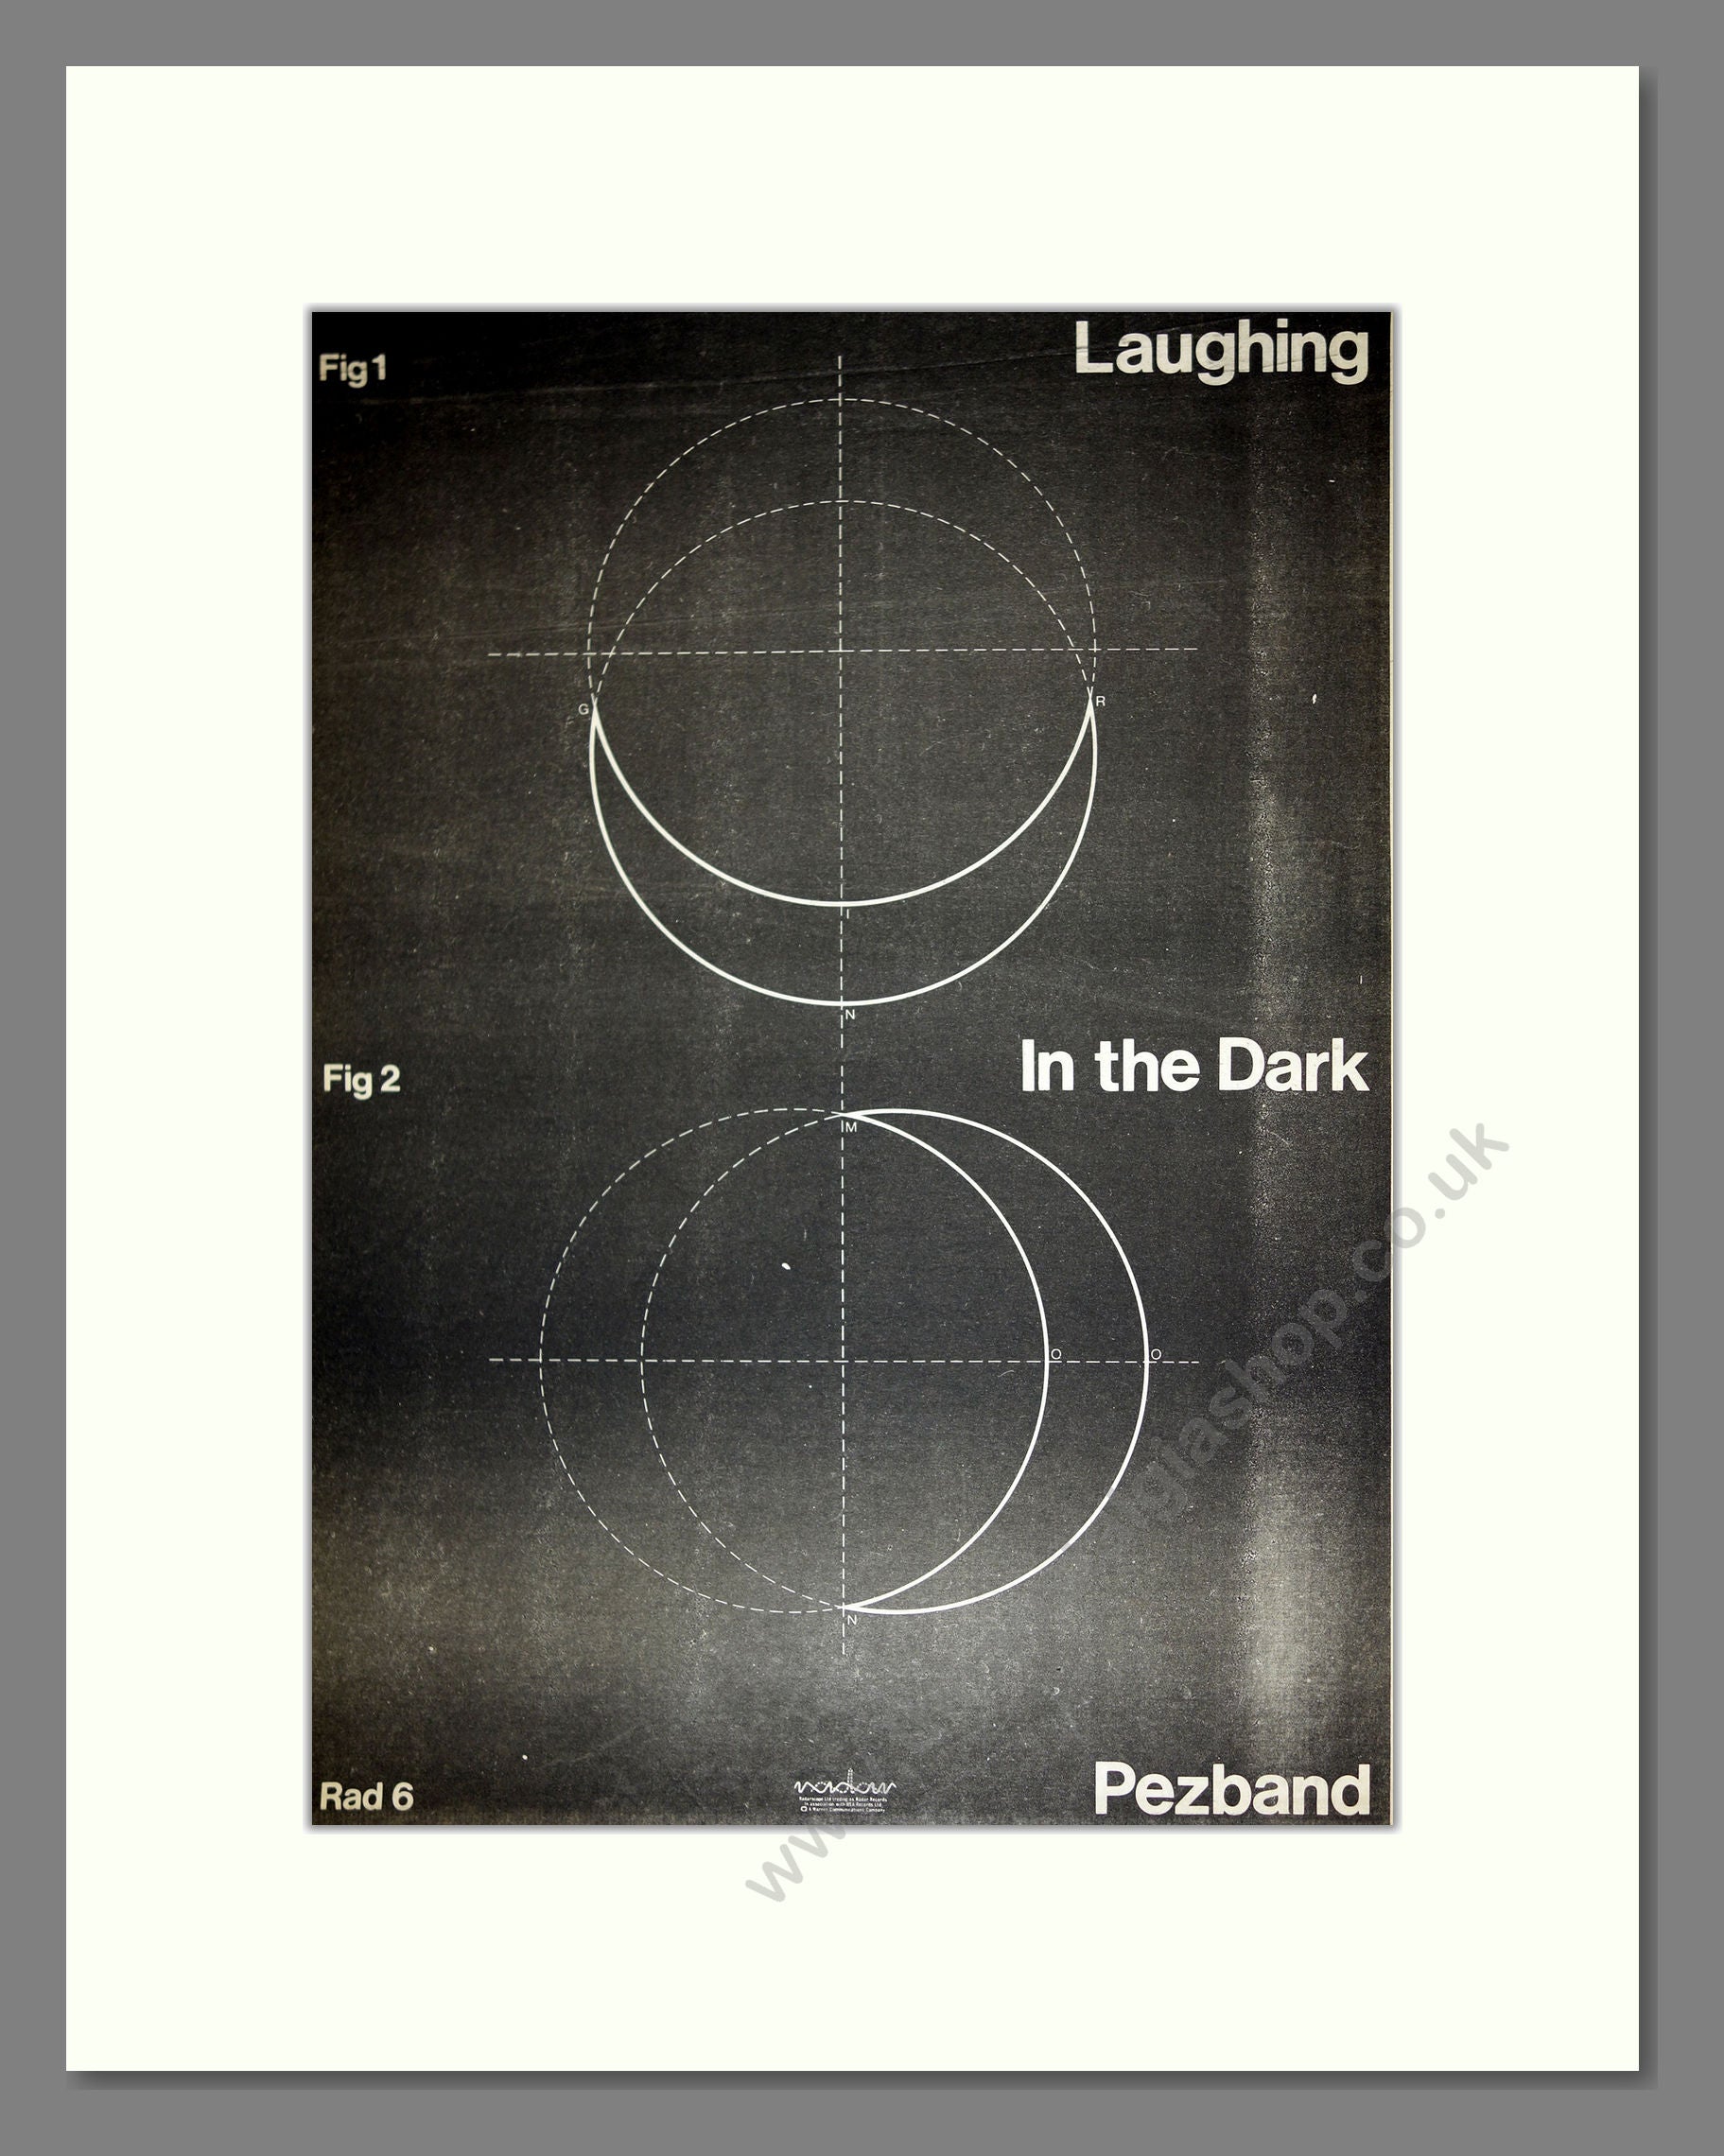 Pezband - Laughing in the Dark. Vintage Advert 1978 (ref AD16750)